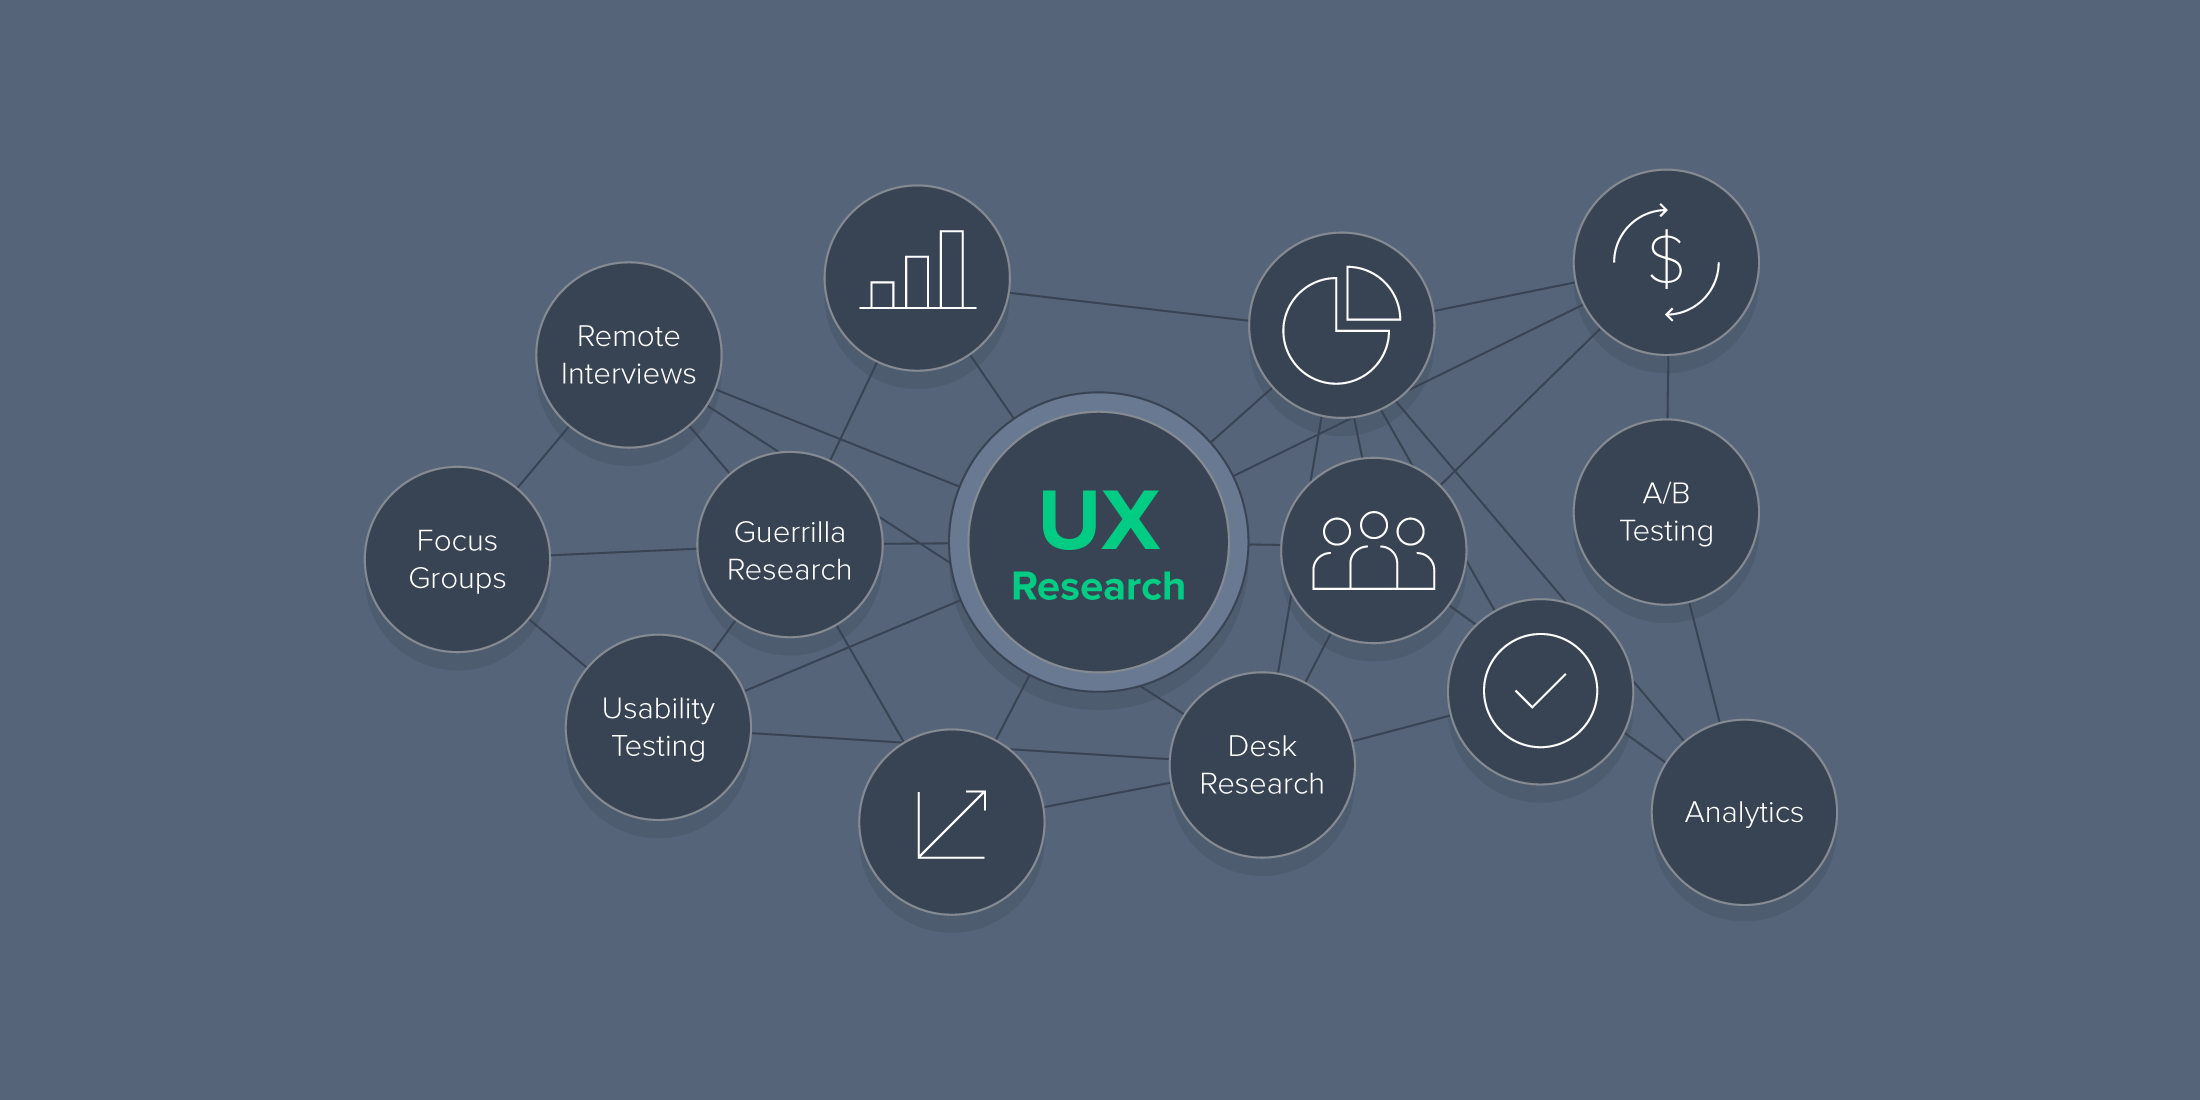 UX Research: 3 Tips to Make Sure You Meet User’s Needs